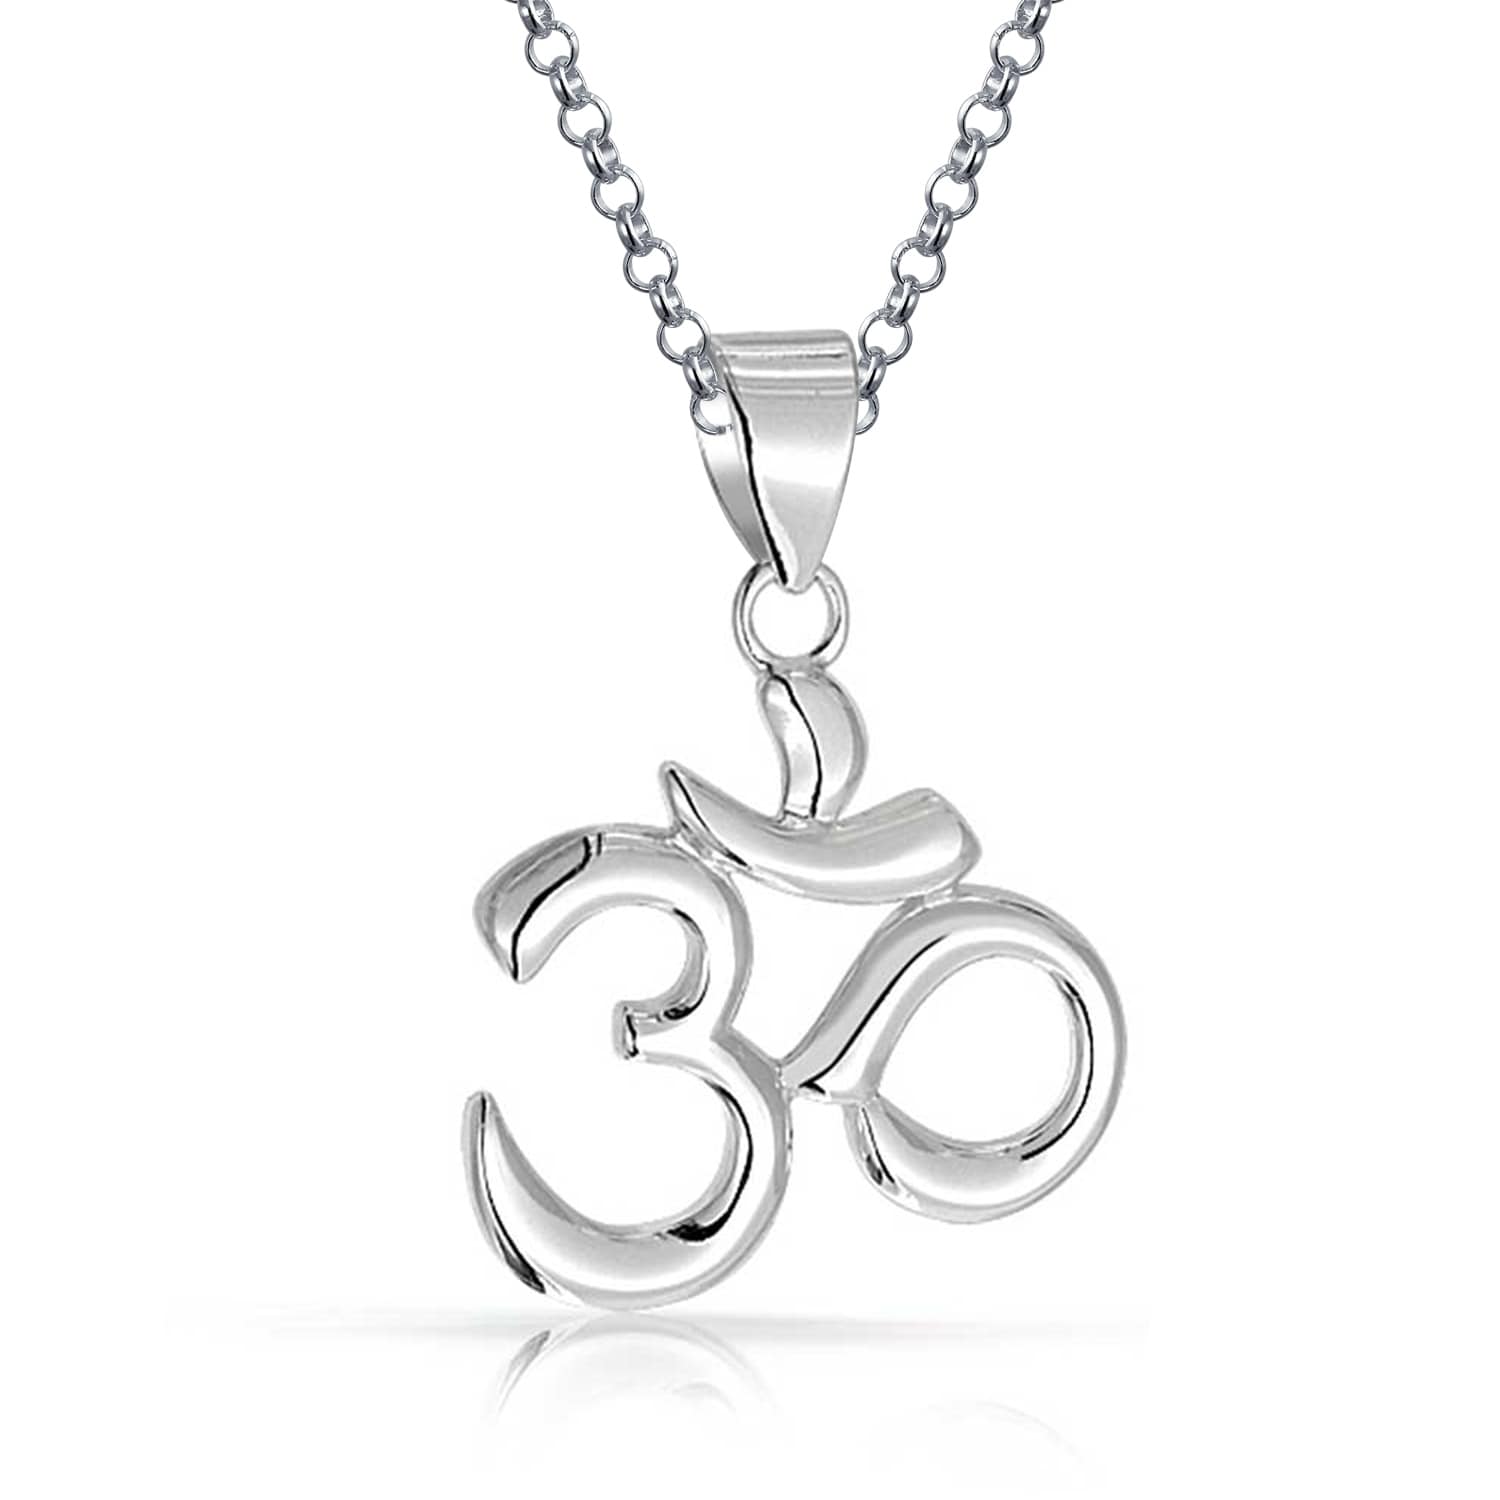 Women/'s sterling silver OM necklace with chain 16 long ohm jewelry yoga boho jewelry universal peace consciousness gift for her